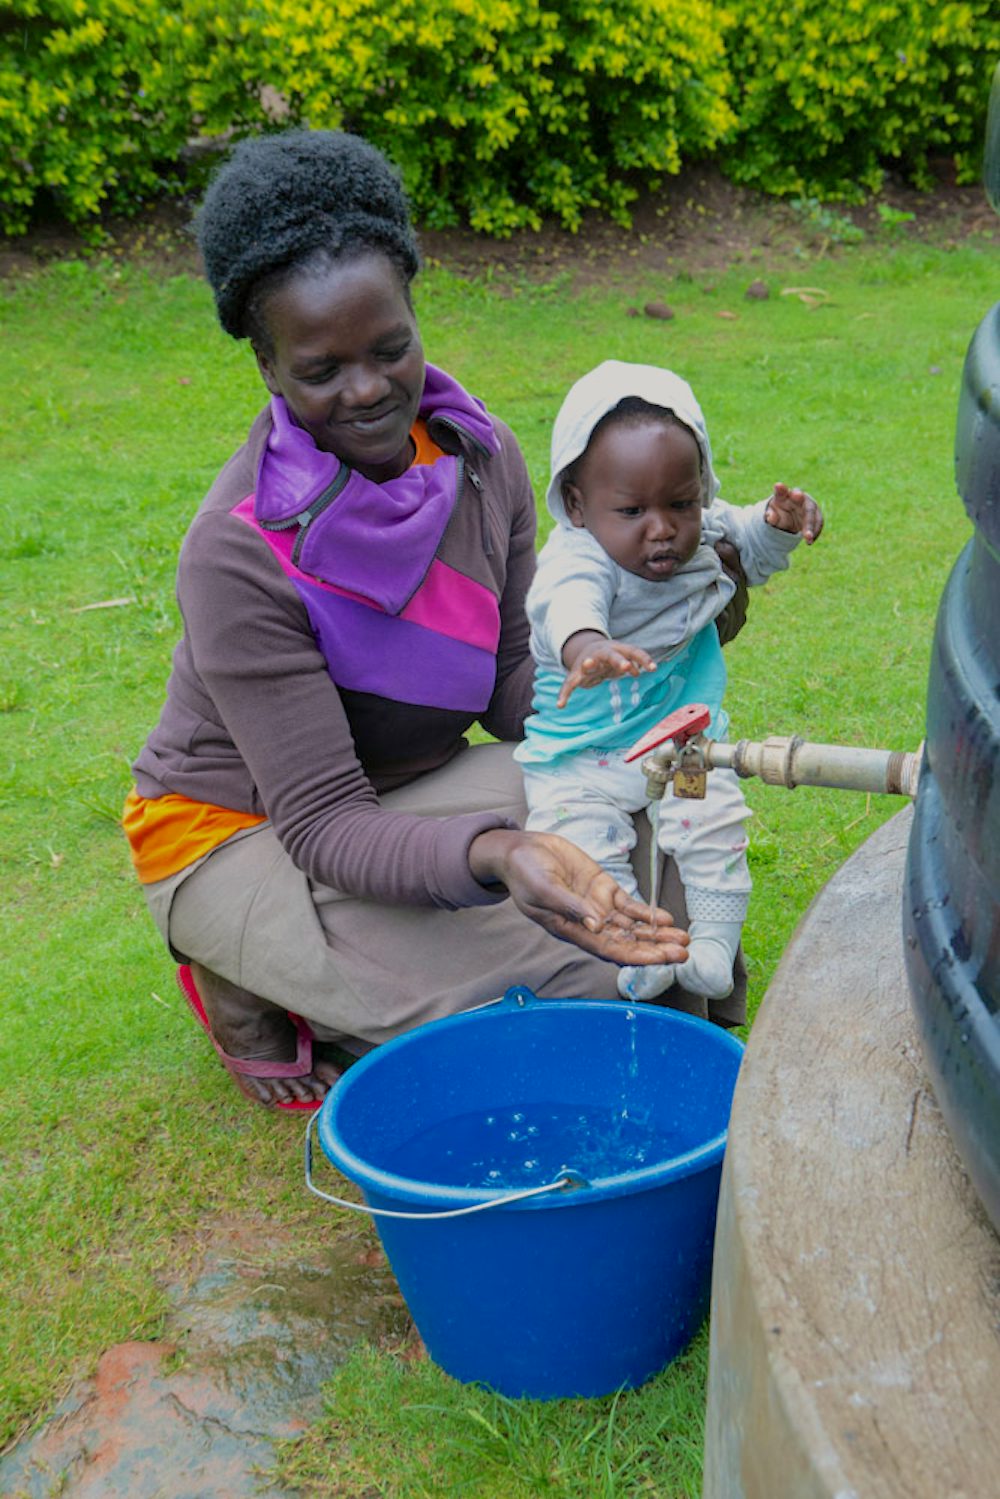 A woman holding her child gathers water from a rainwater collection tank into a blue bucket.